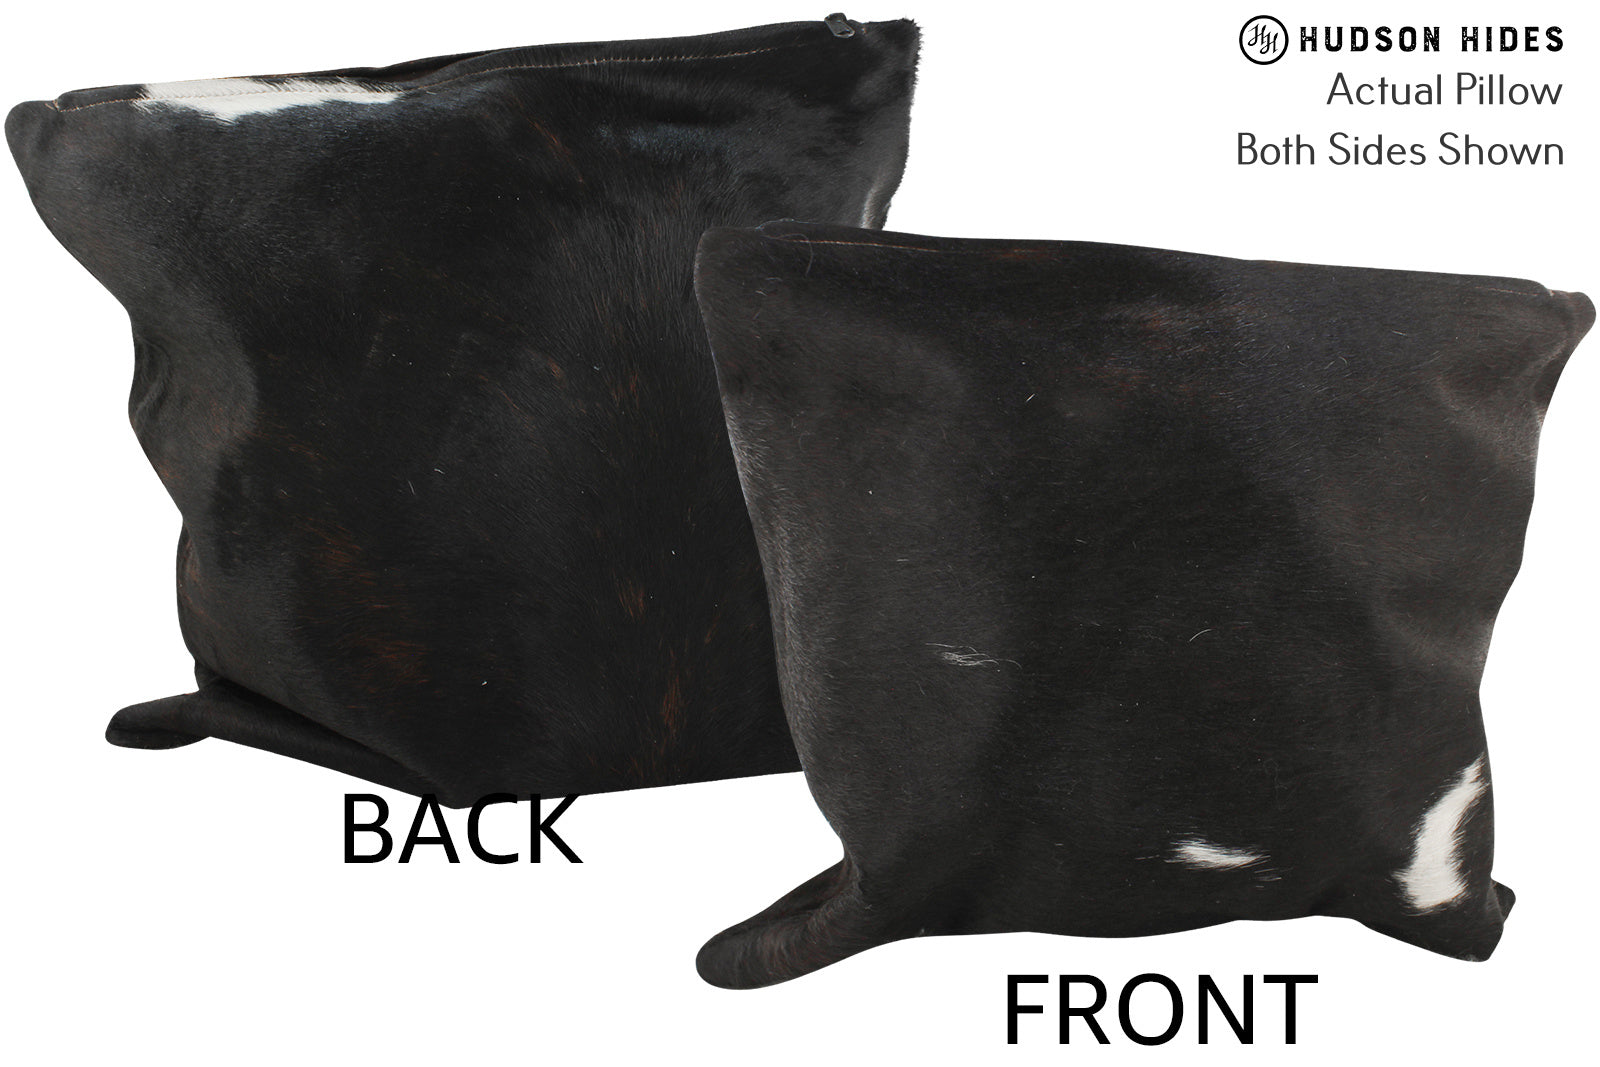 Black and White Cowhide Pillow #35681